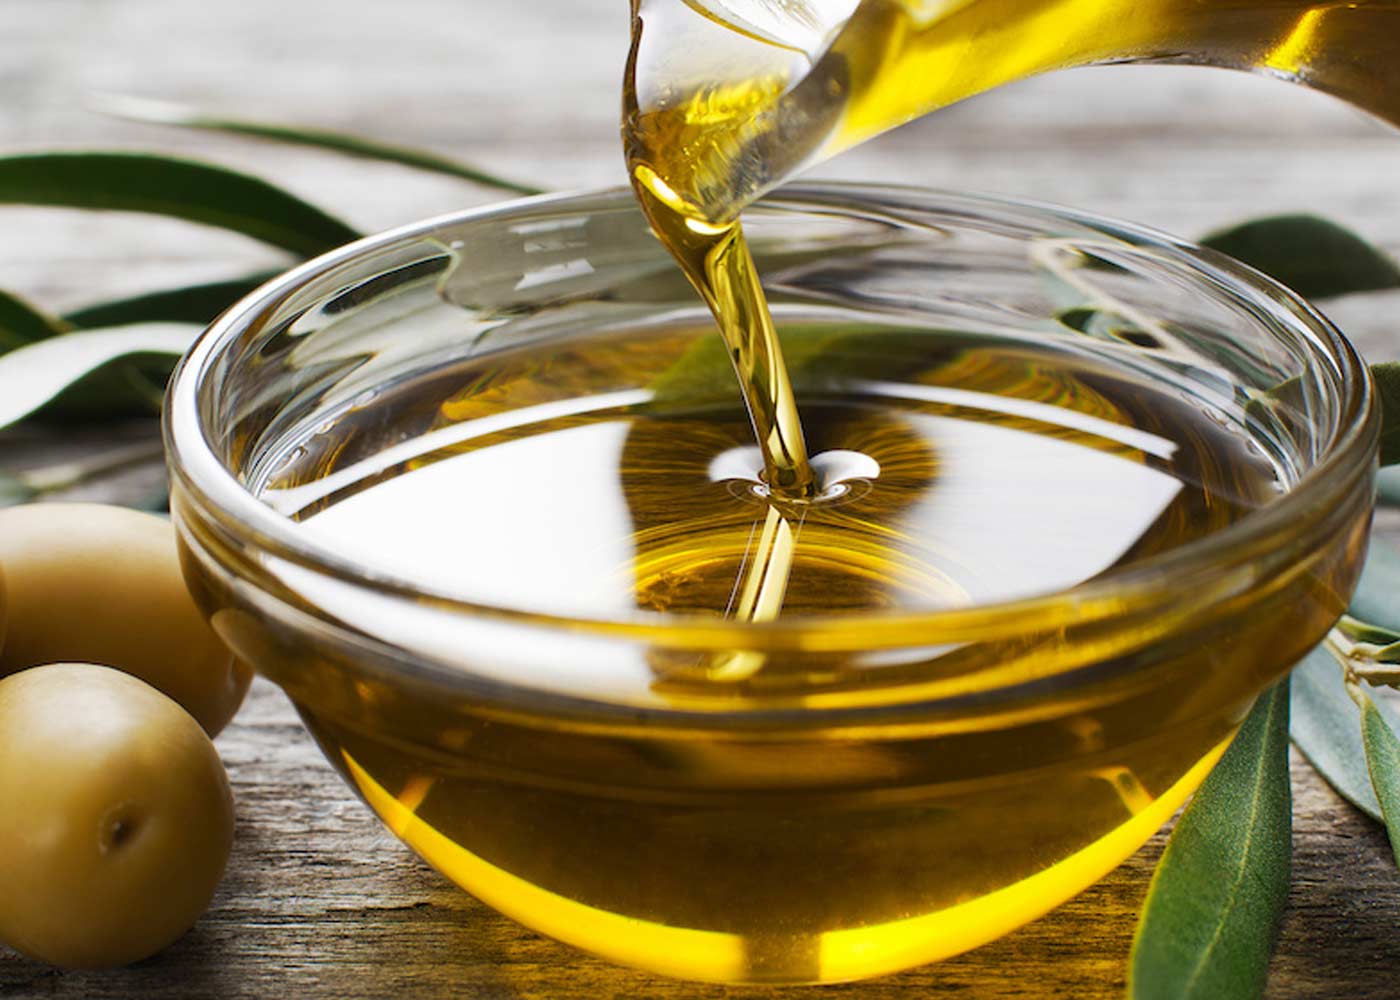 What to Look For on Olive Oil Labels